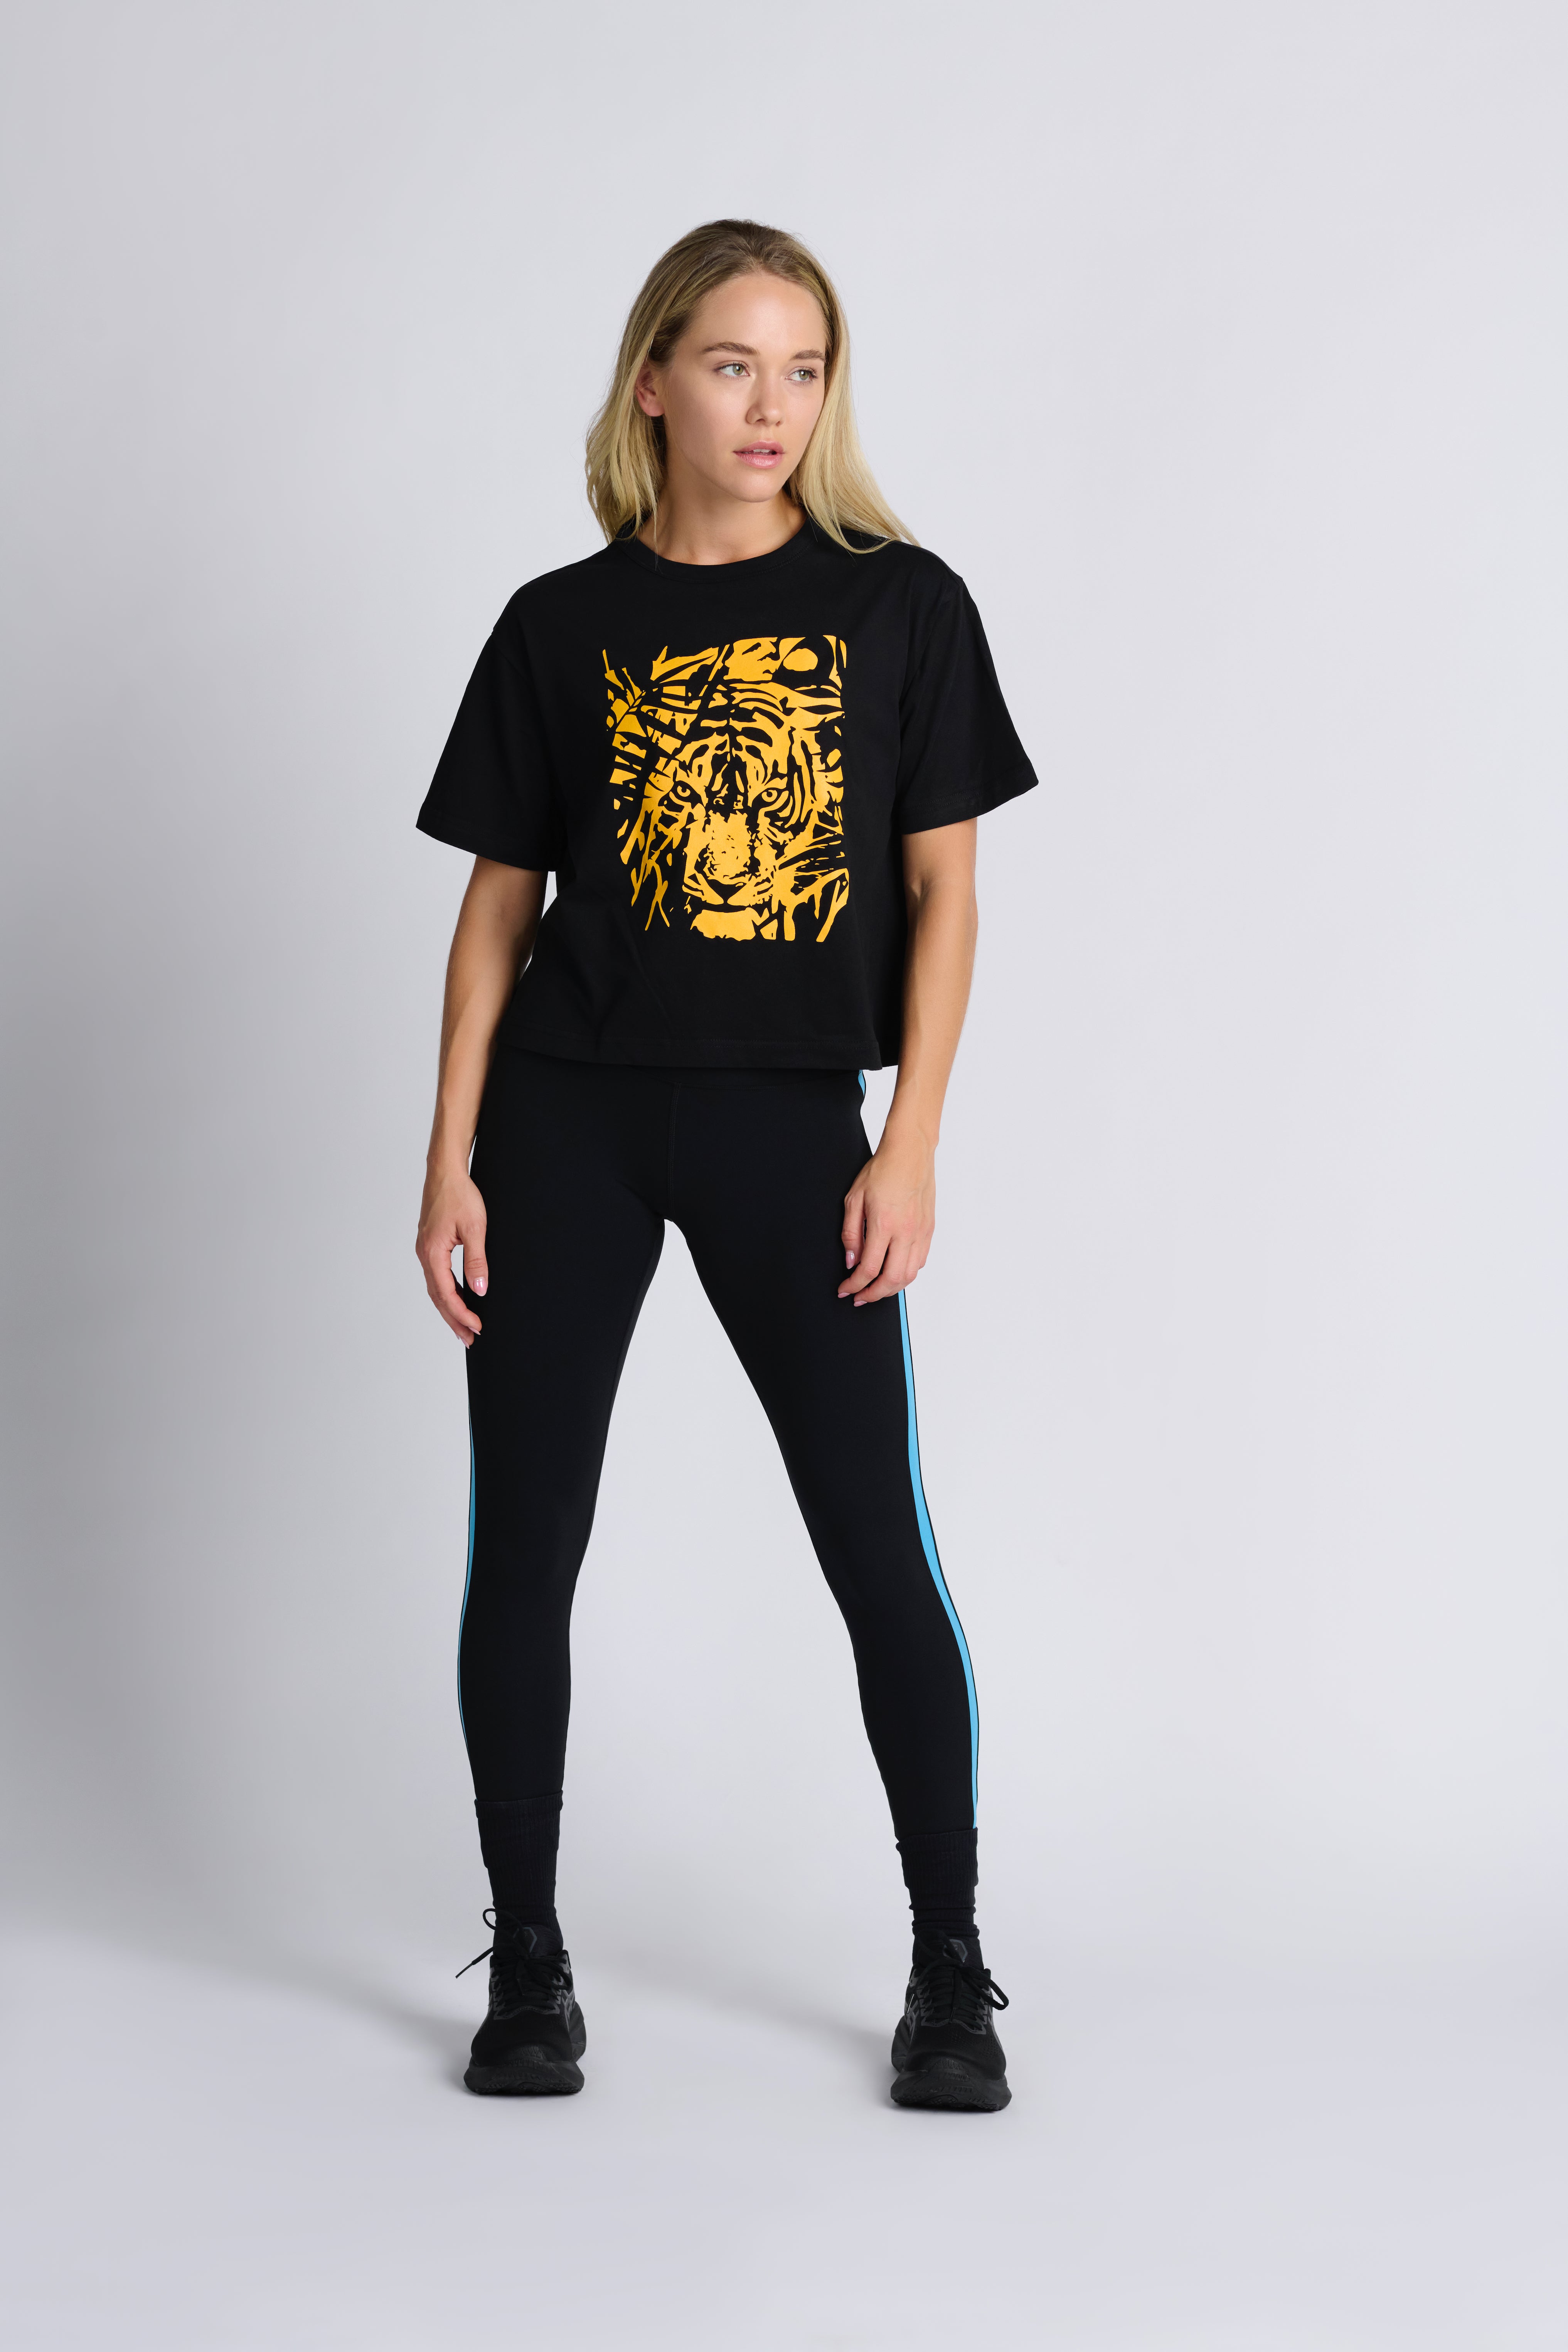 Tiger T-Shirt - super soft and luxurious feel